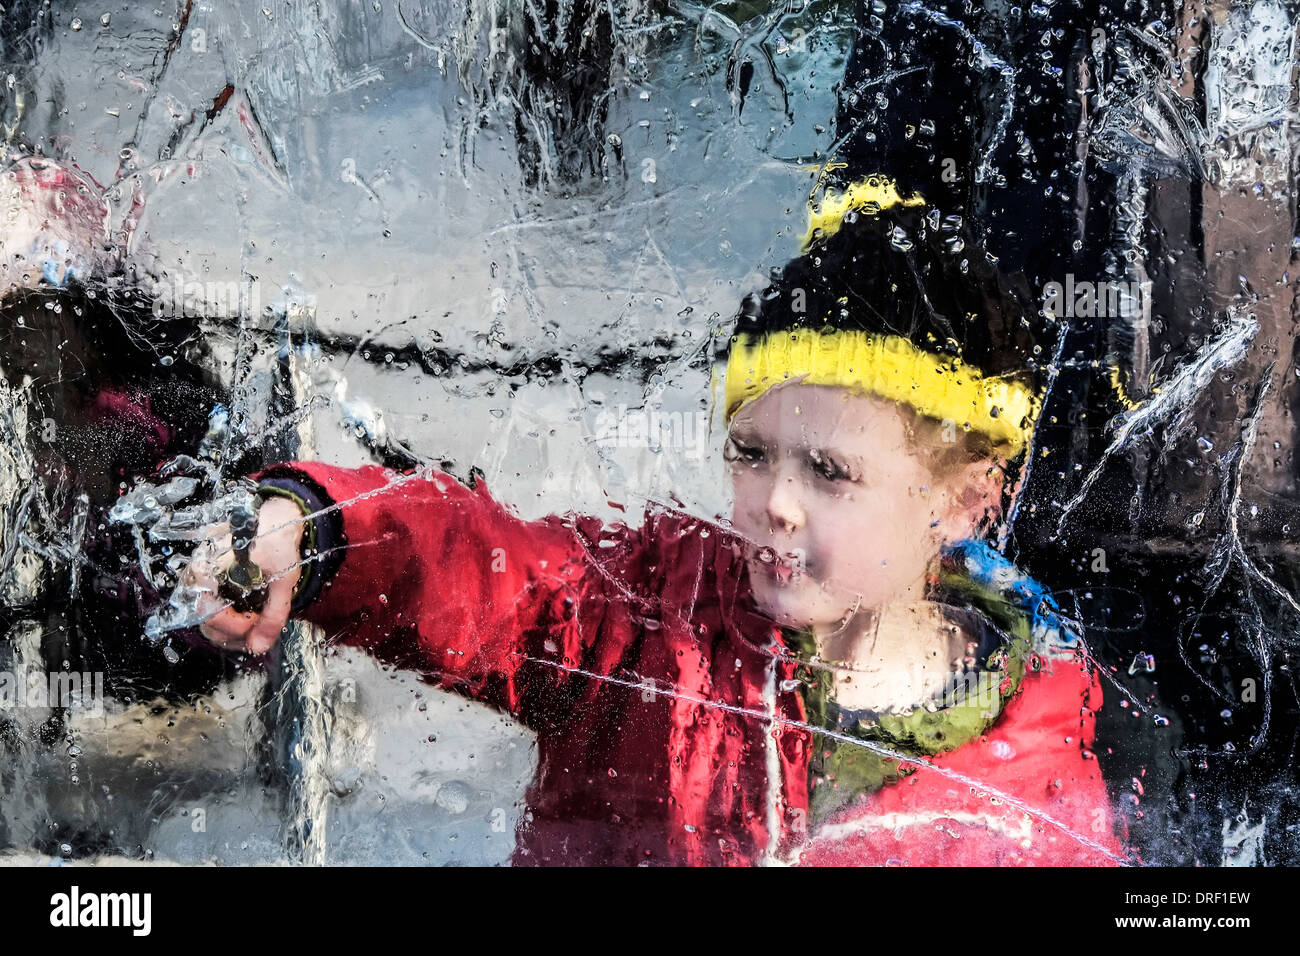 Members of the public trying out ice sculpting as part of the London Ice Sculpture Festival 2014. Stock Photo